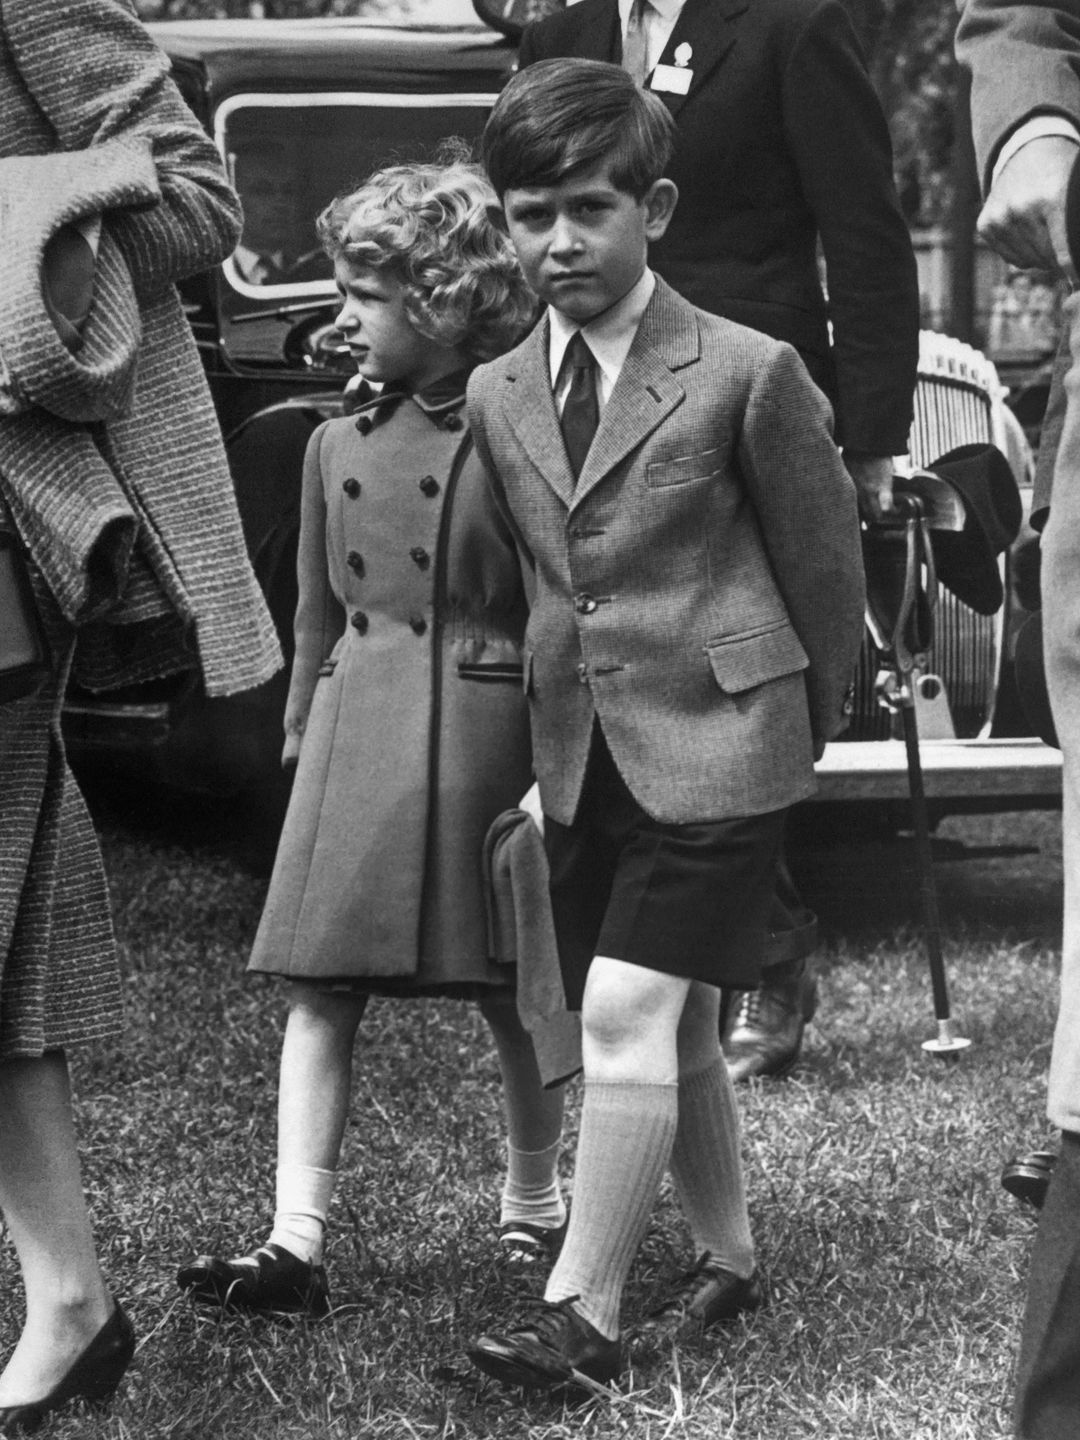 Then-Prince Charles and Princess Anne walking at the Windsor castle in 1958